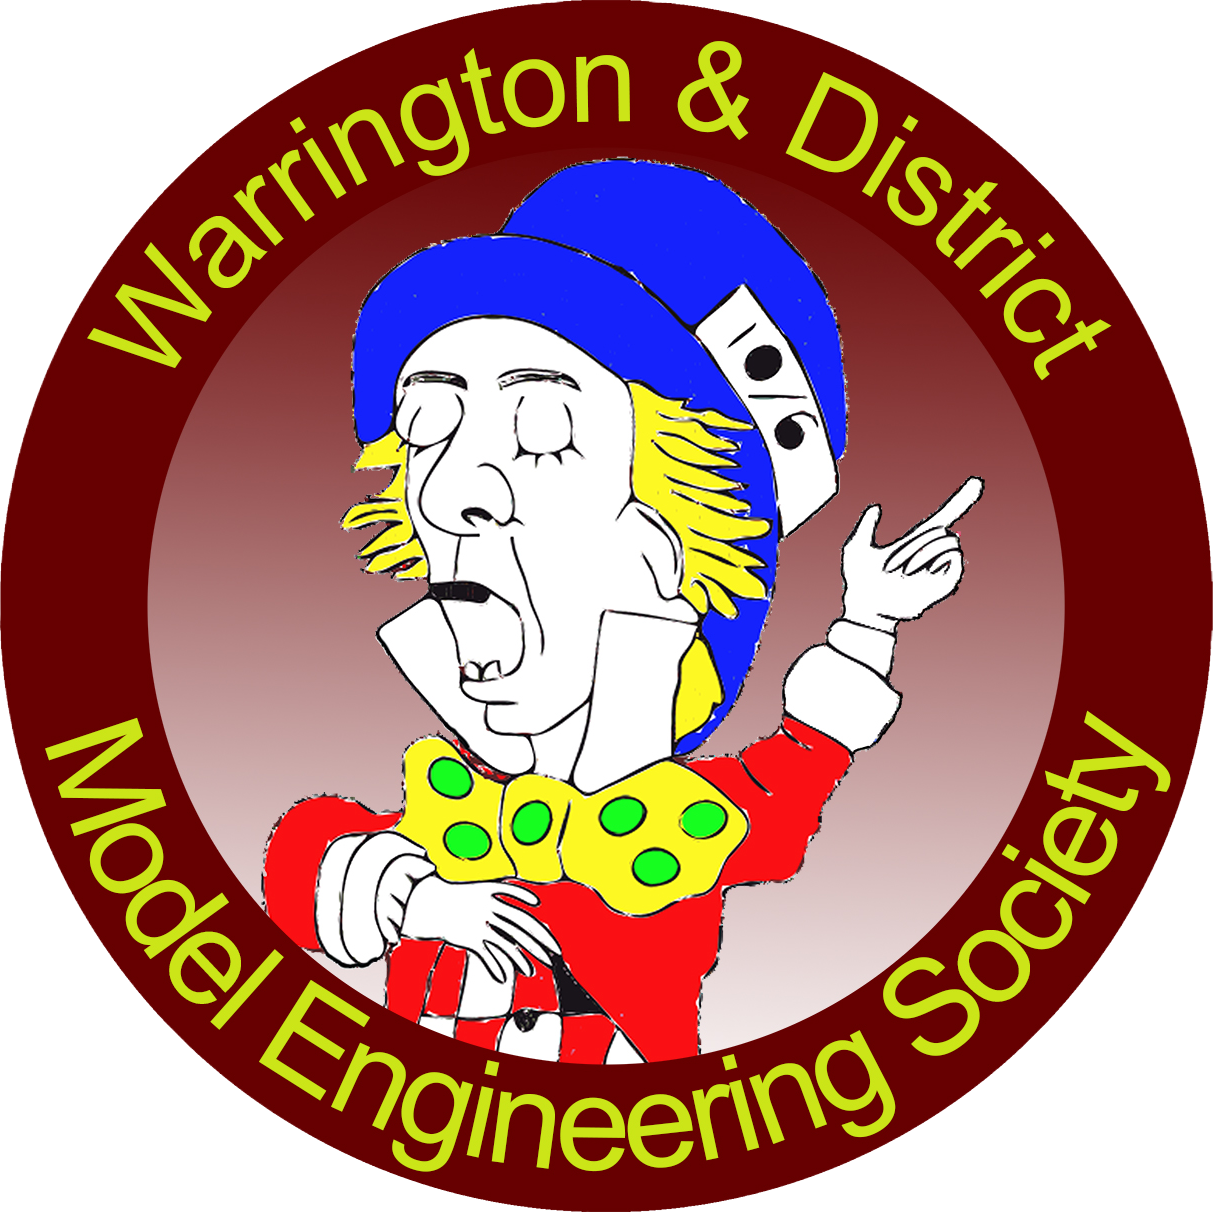 WDMES – Warrington & District Model Engineering Society